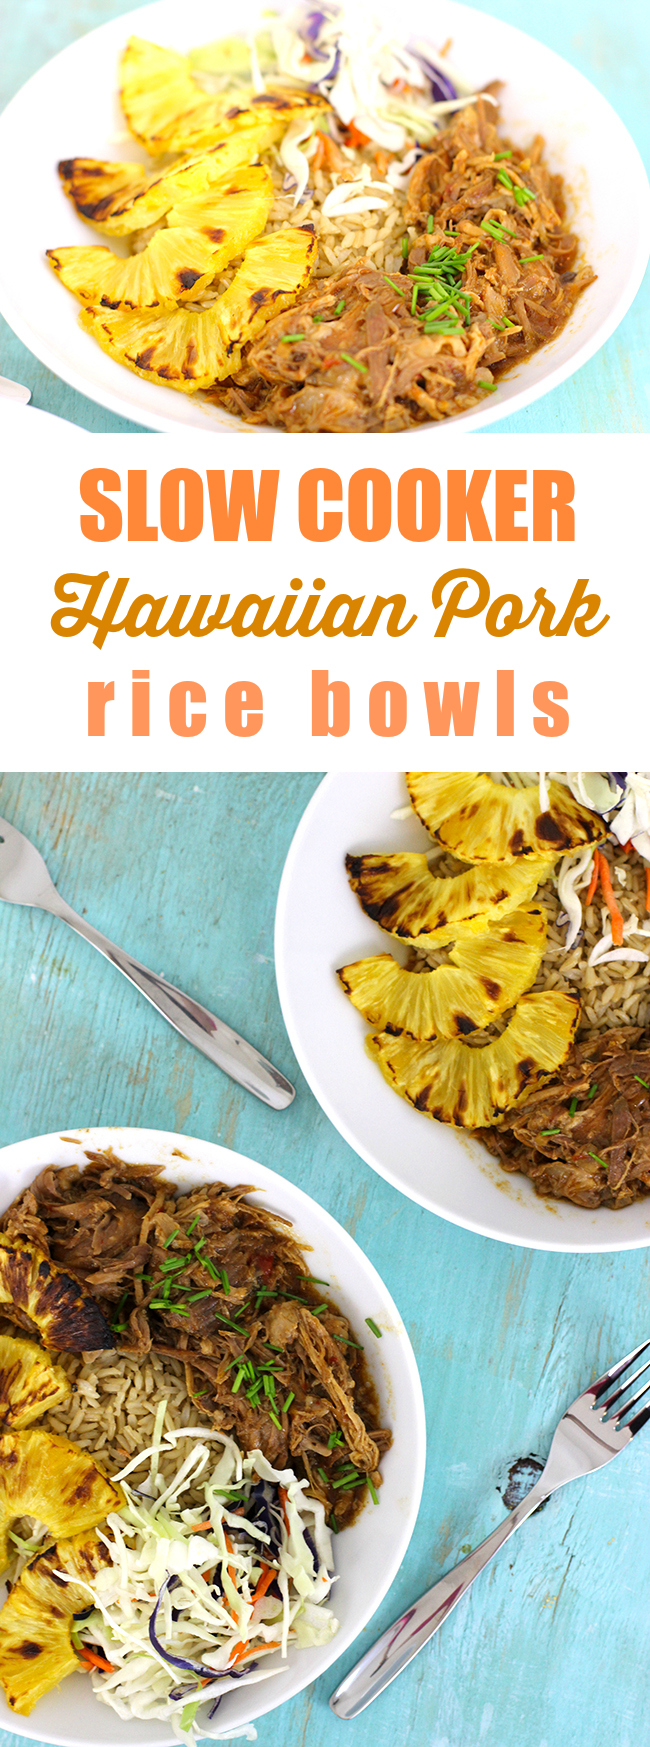 Pork Hawaiian Bowls straight from the slow cooker. YUM.